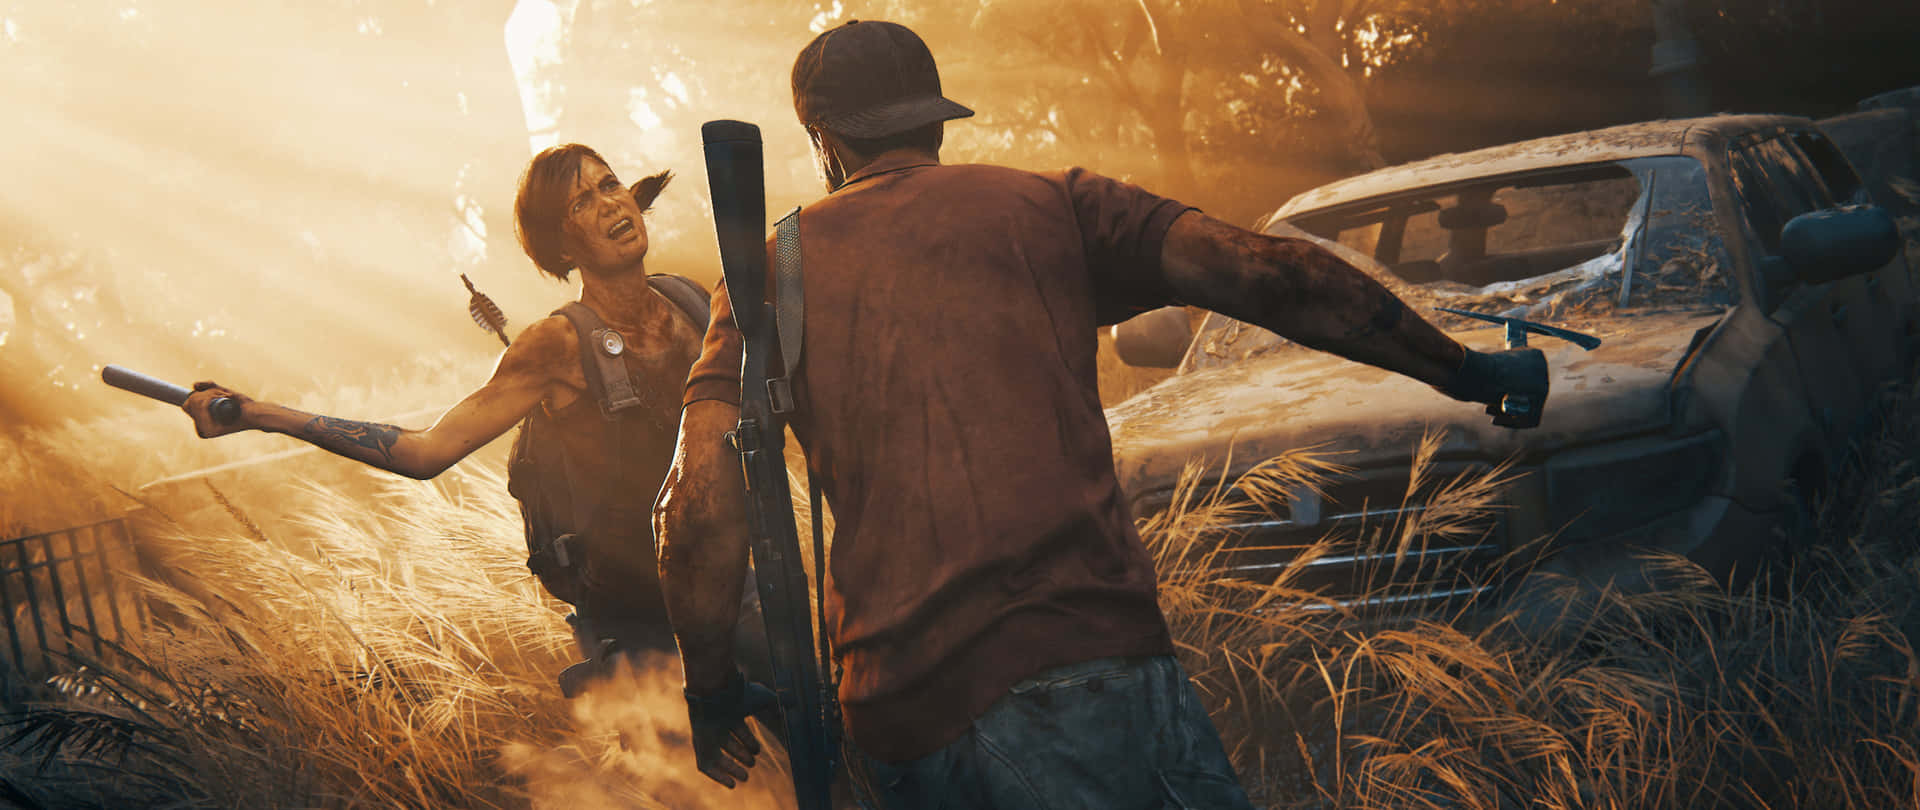 Joel and Ellie exploring the post-apocalyptic world of The Last of Us